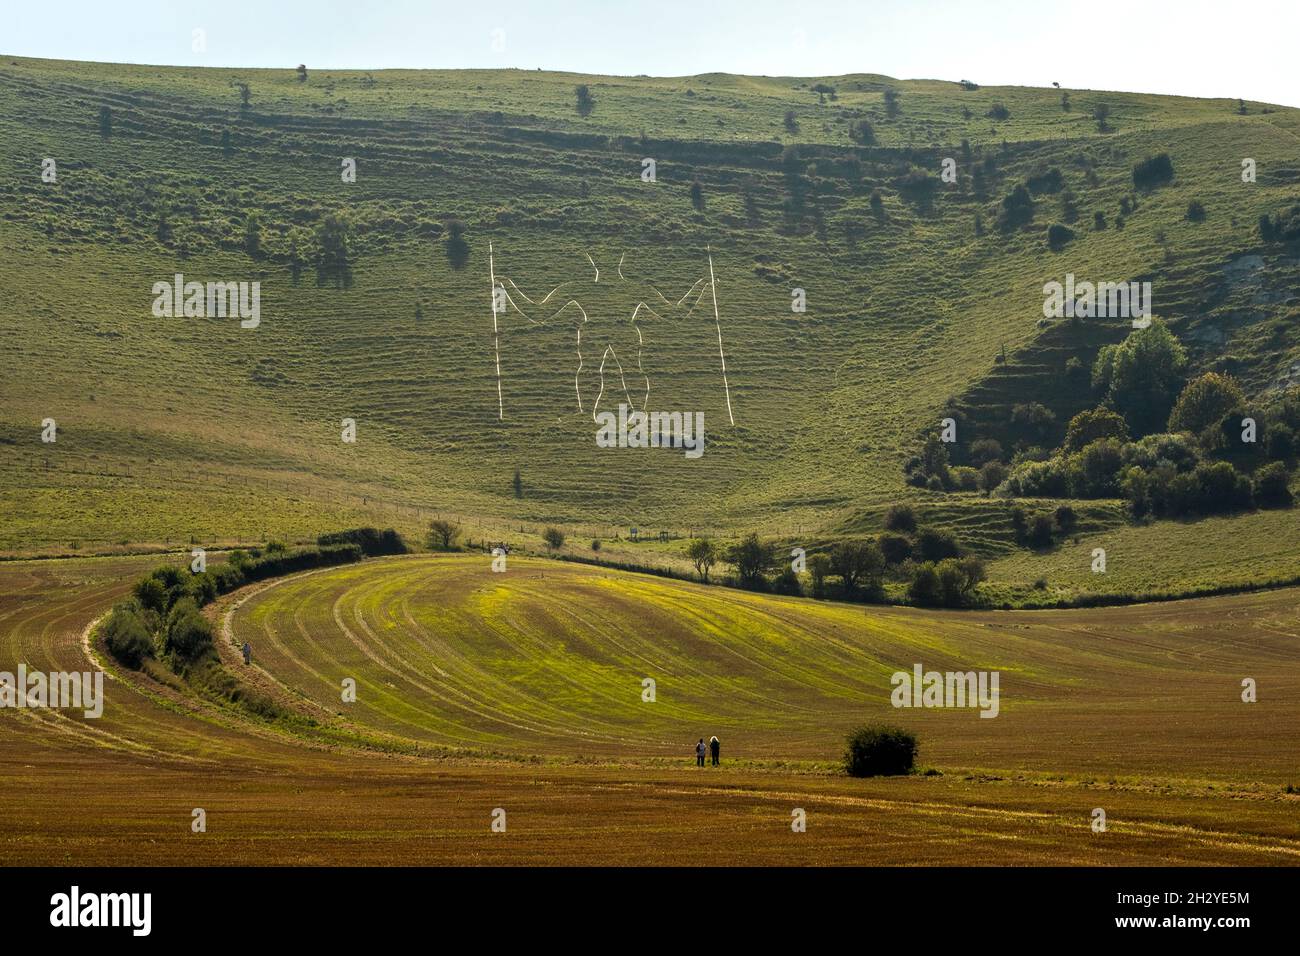 The Long Man of Wilmington carved in hills at Wilmington, East Sussex, UK. Stock Photo